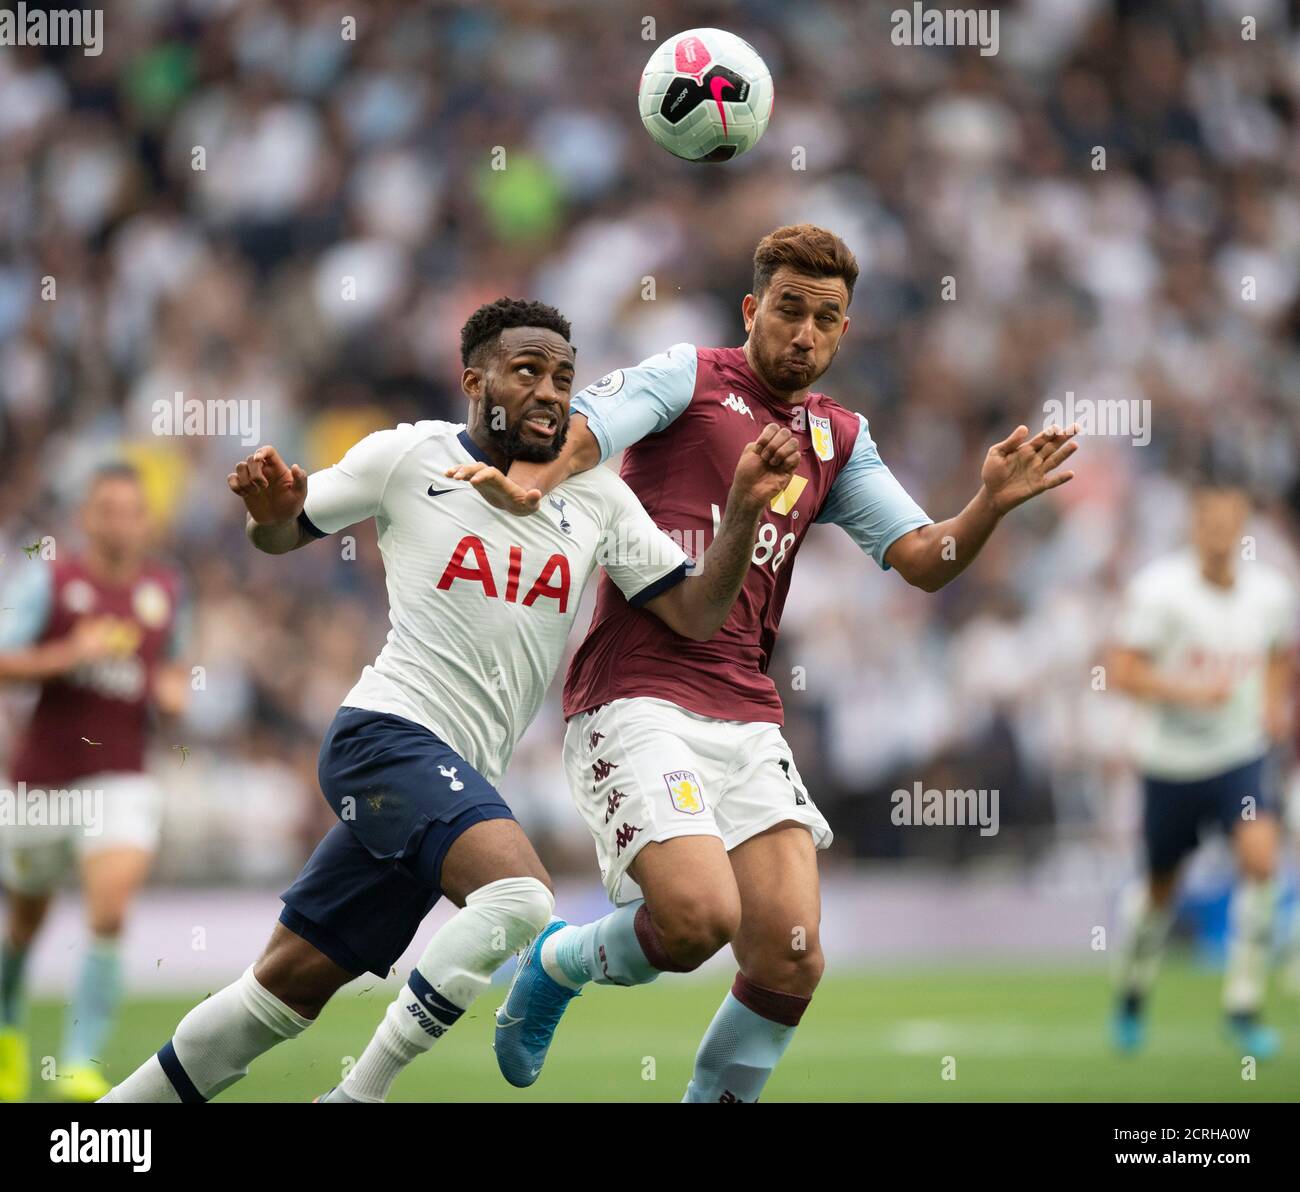 Danny Rose tries to hold off Trezeguet   PHOTO CREDIT : © MARK PAIN / ALAMY STOCK PHOTO Stock Photo